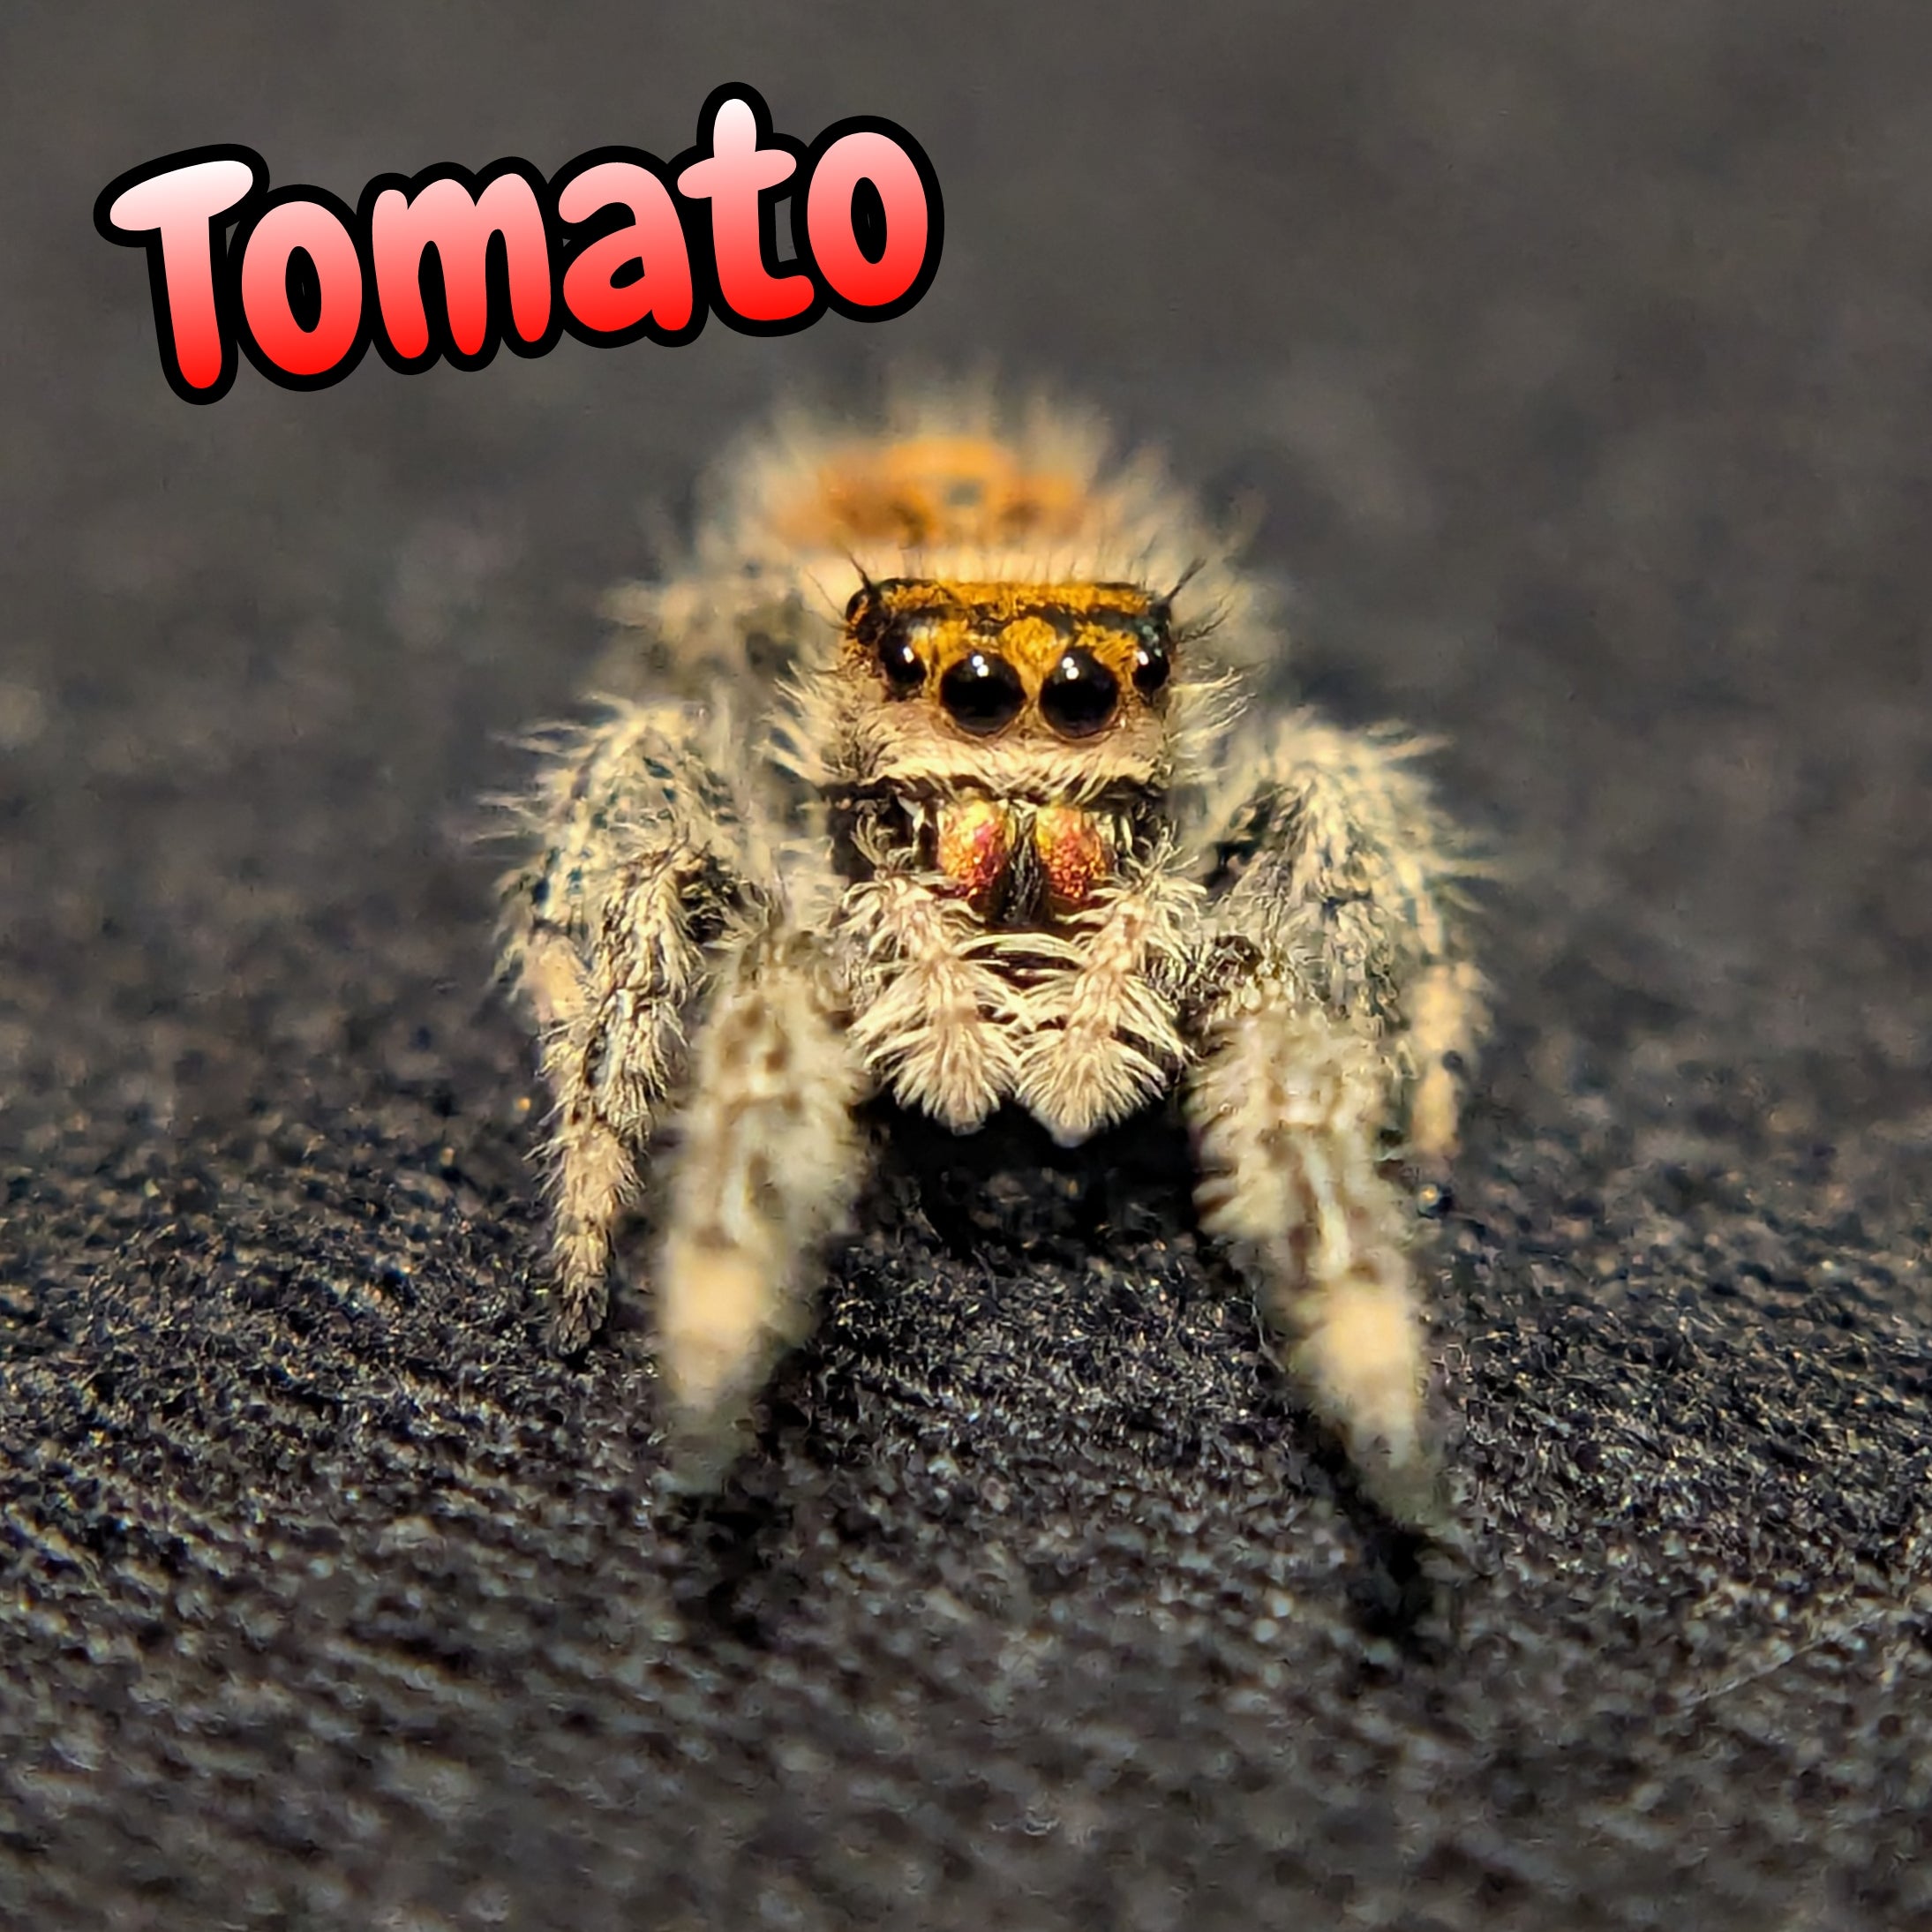 Regal Jumping Spider "Tomato"